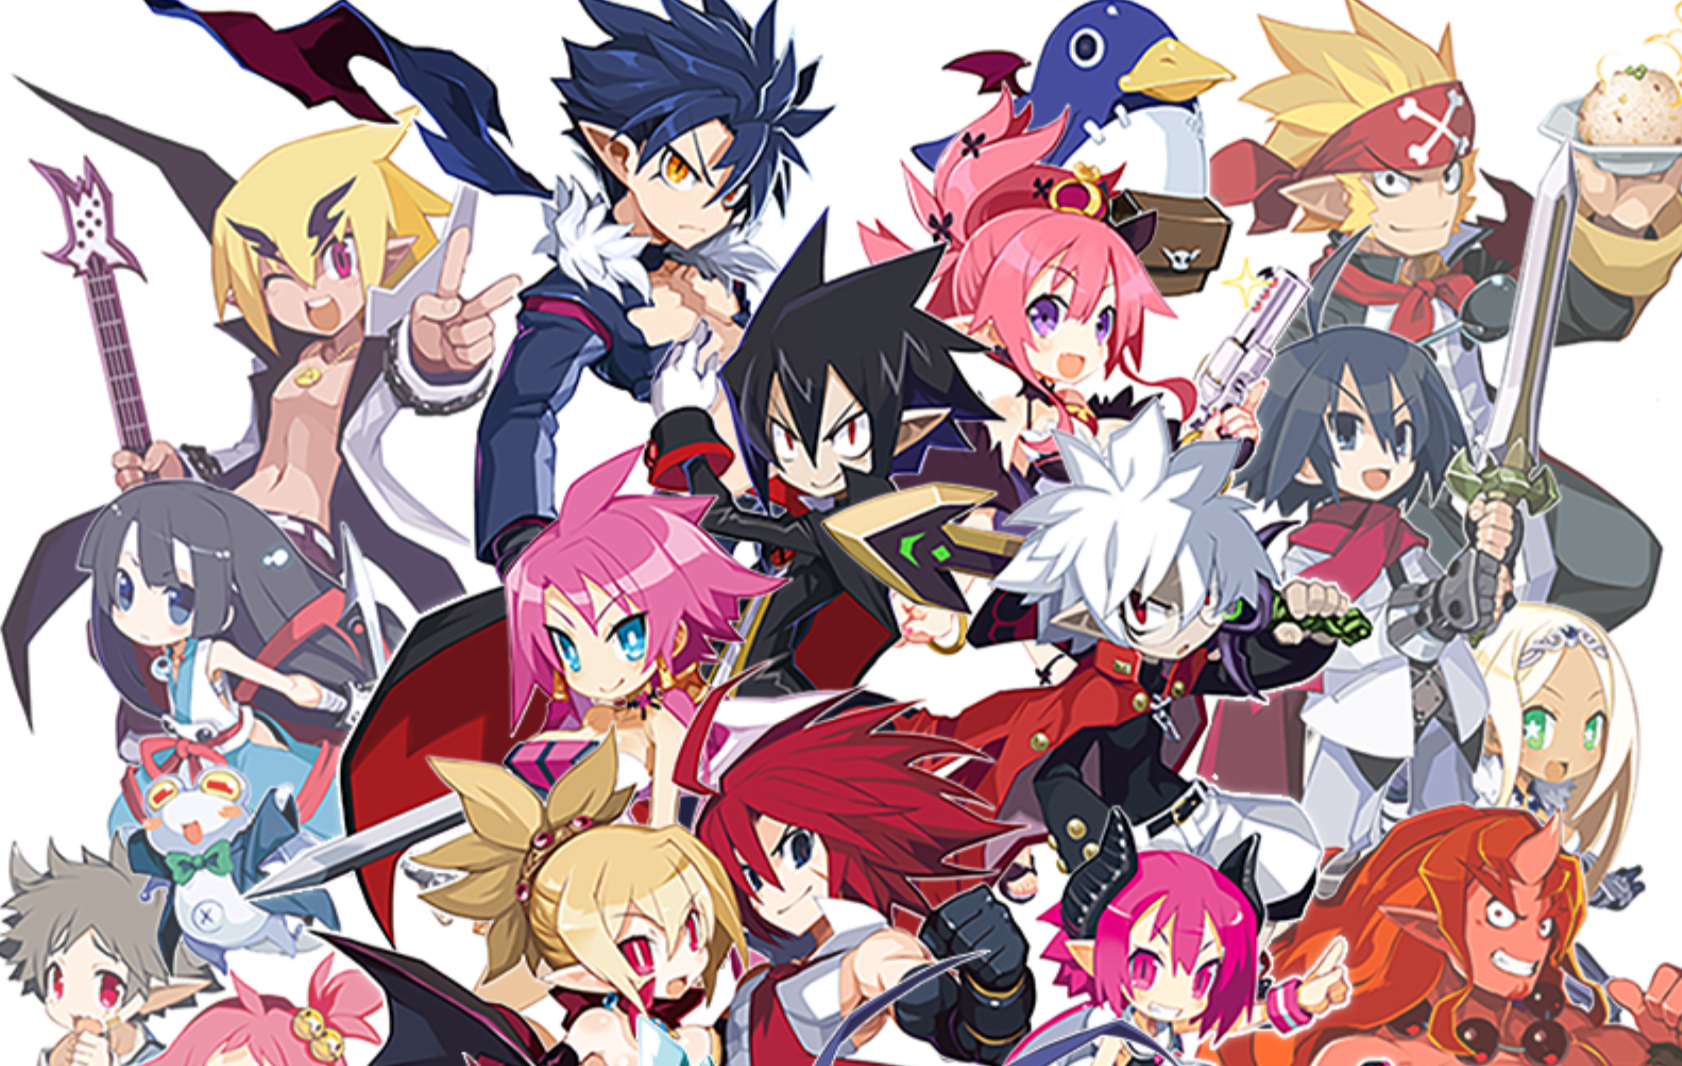 instal the new version for android Disgaea 6 Complete